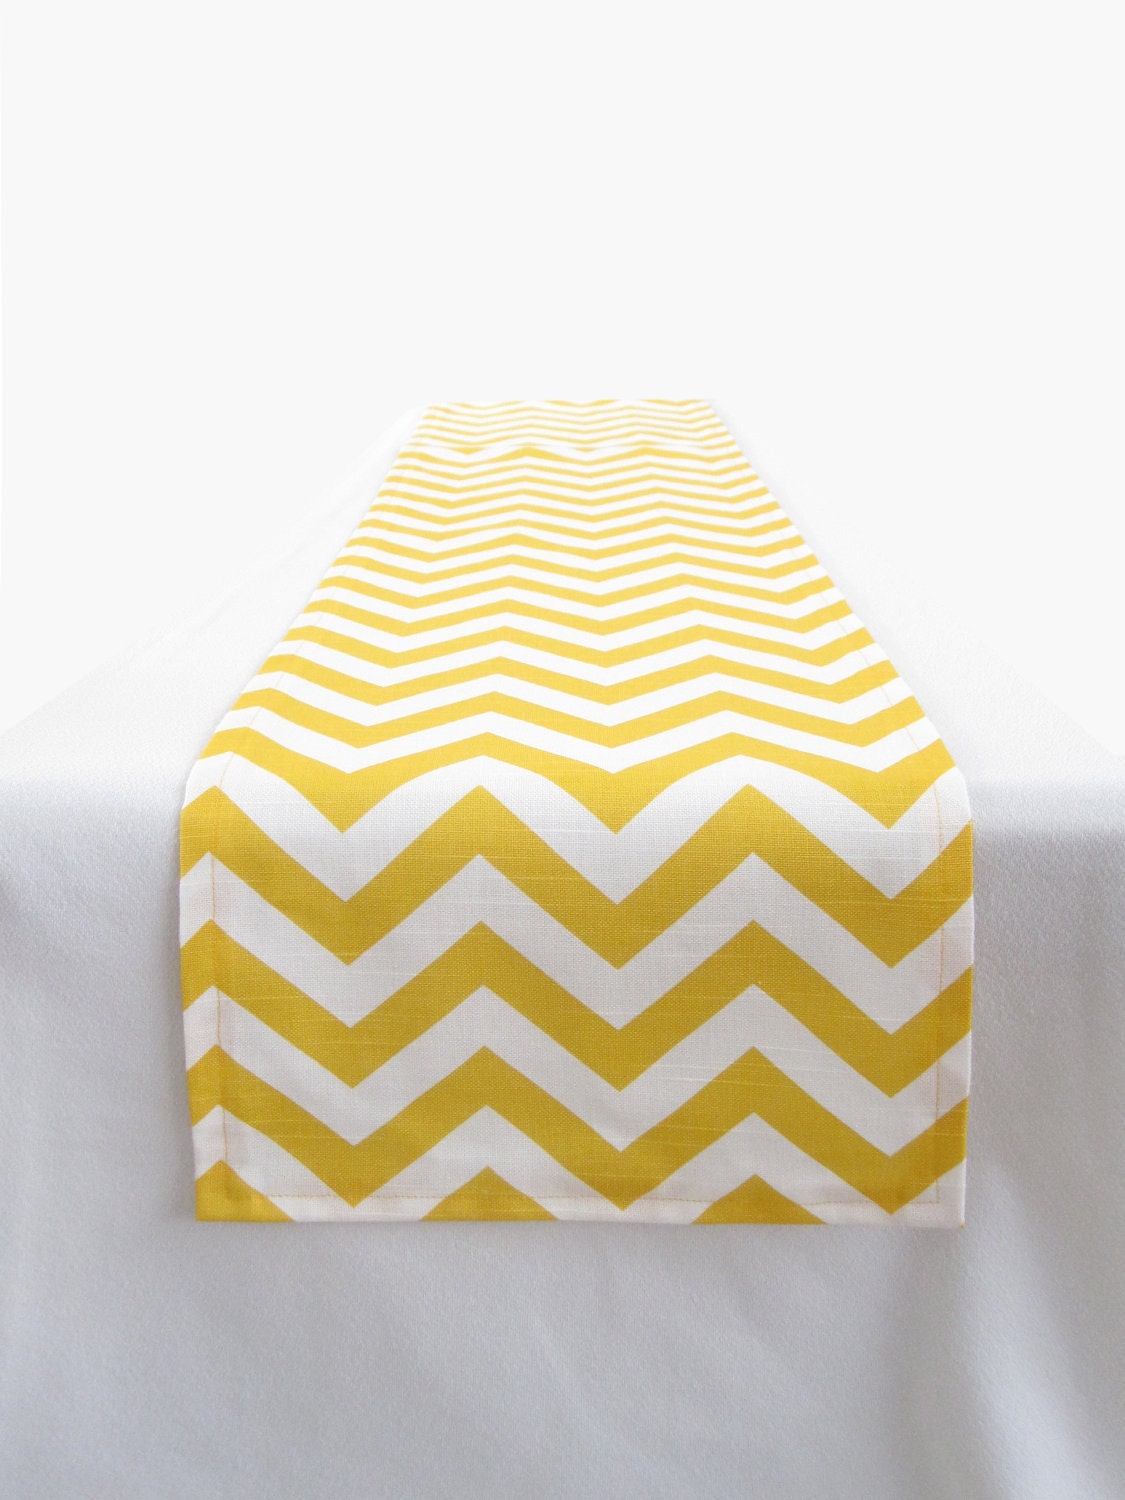 Yellow and White Chevron Table Runner - 11 x 72 in. - Ultrapom